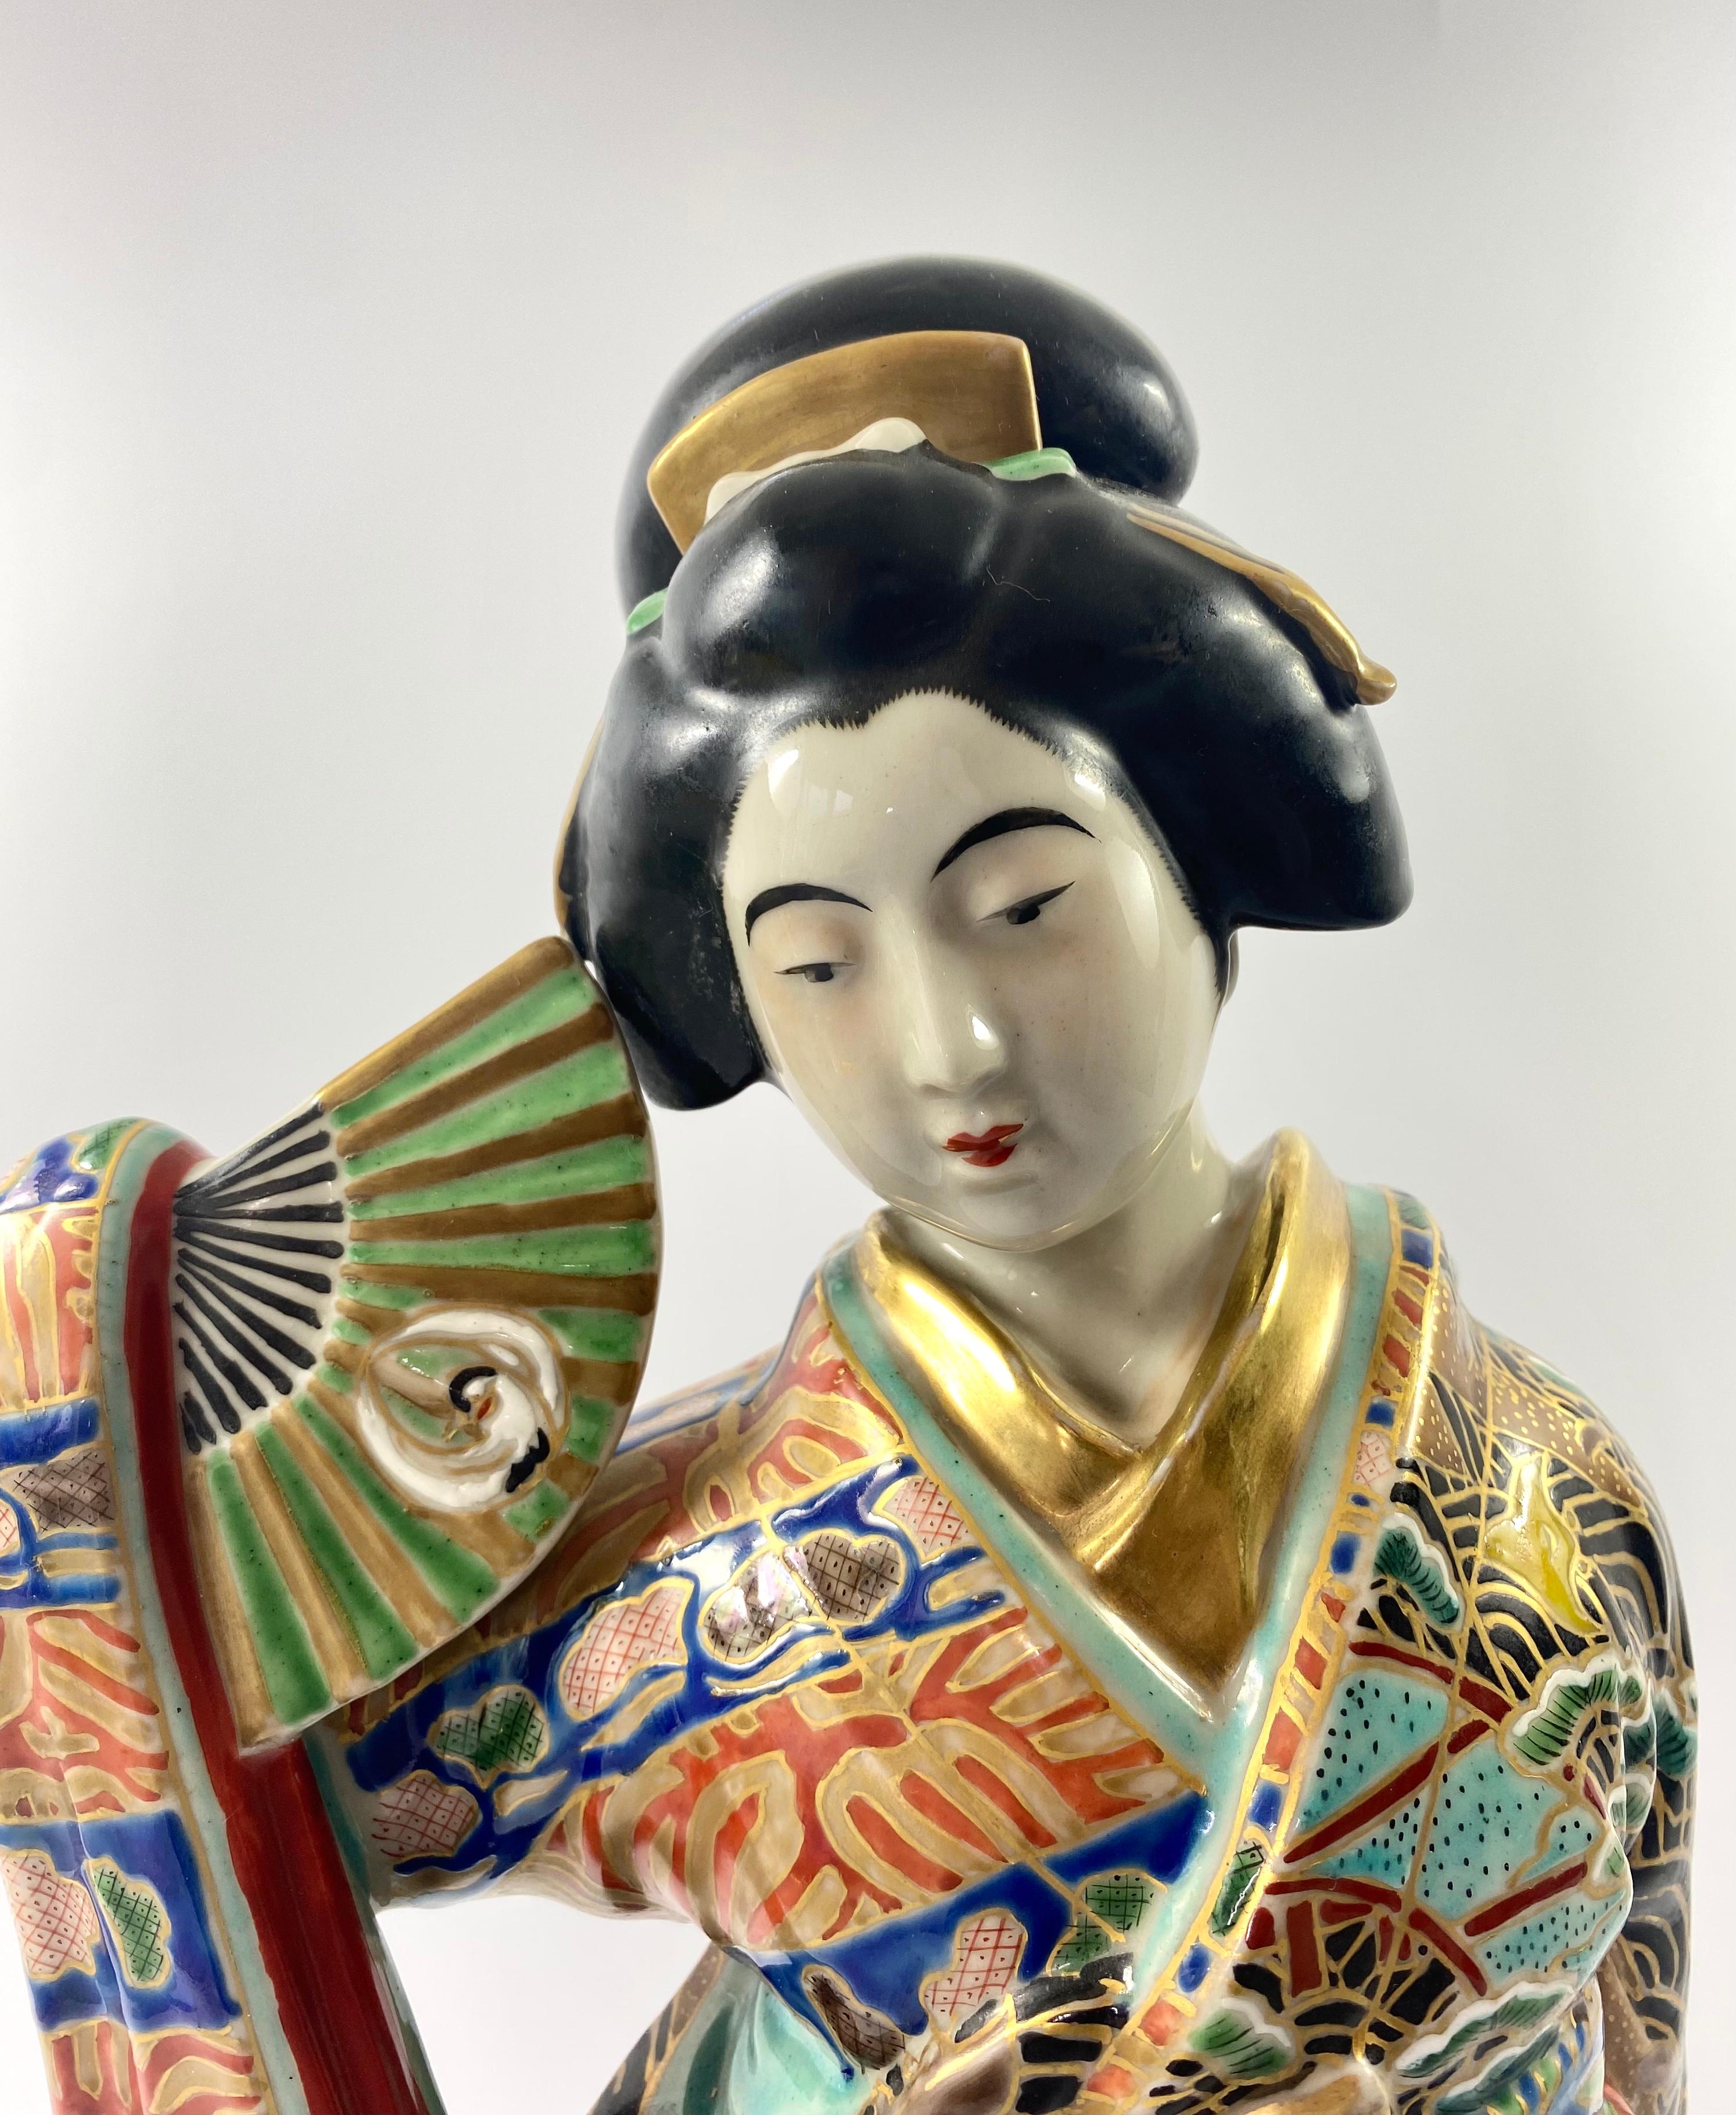 A large Kutani porcelain okimono of a Bijin, Japan, c. 1890, Meiji Petiod. The standing Bijin, dressed in an elaborately enamelled kimono, painted with a continuous river landscape of birds flying above snow covered pine trees. She holds a fan in